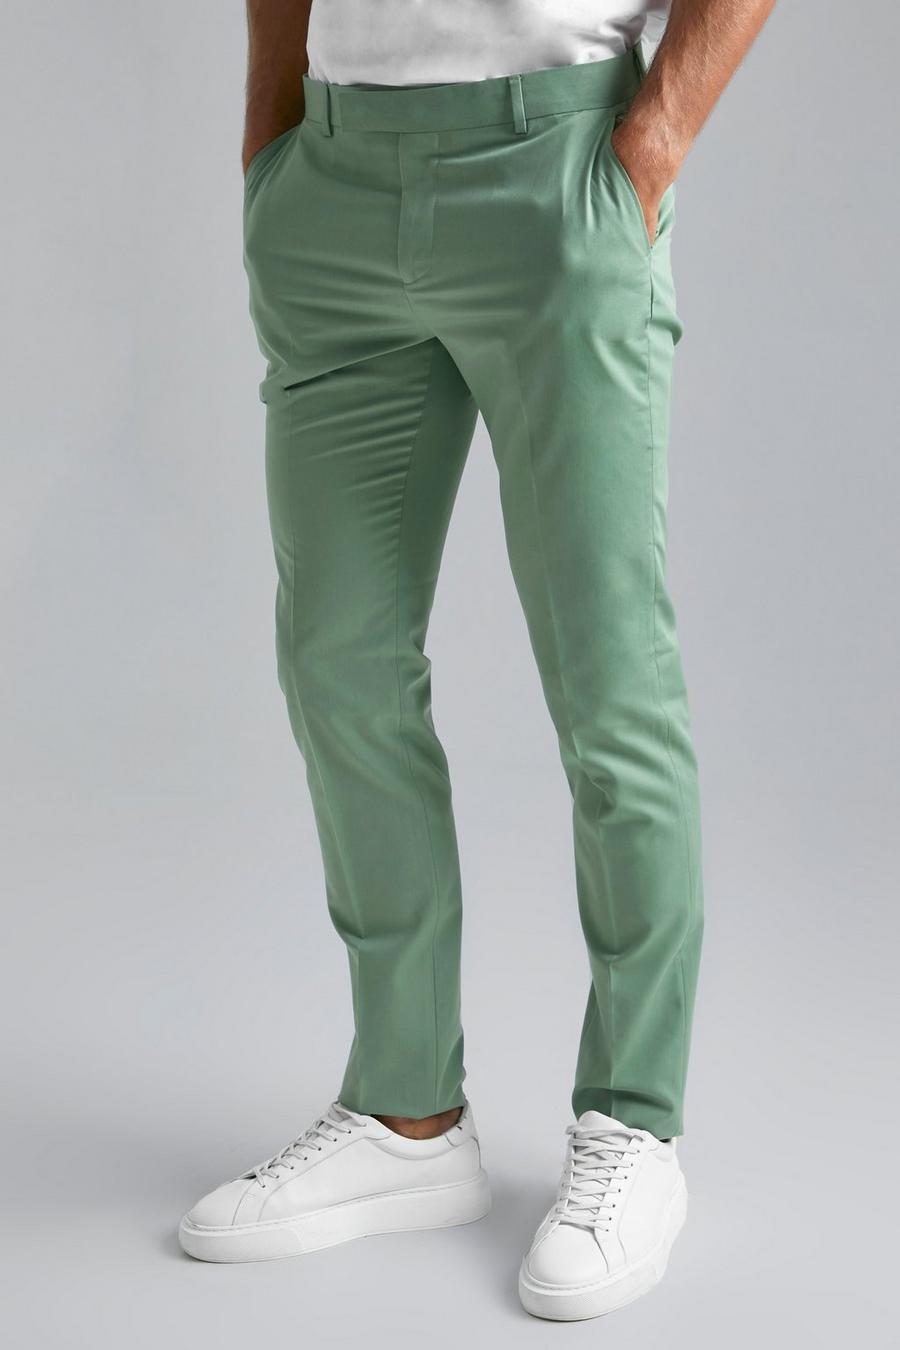 Sage green Tall Skinny Suit Trouser